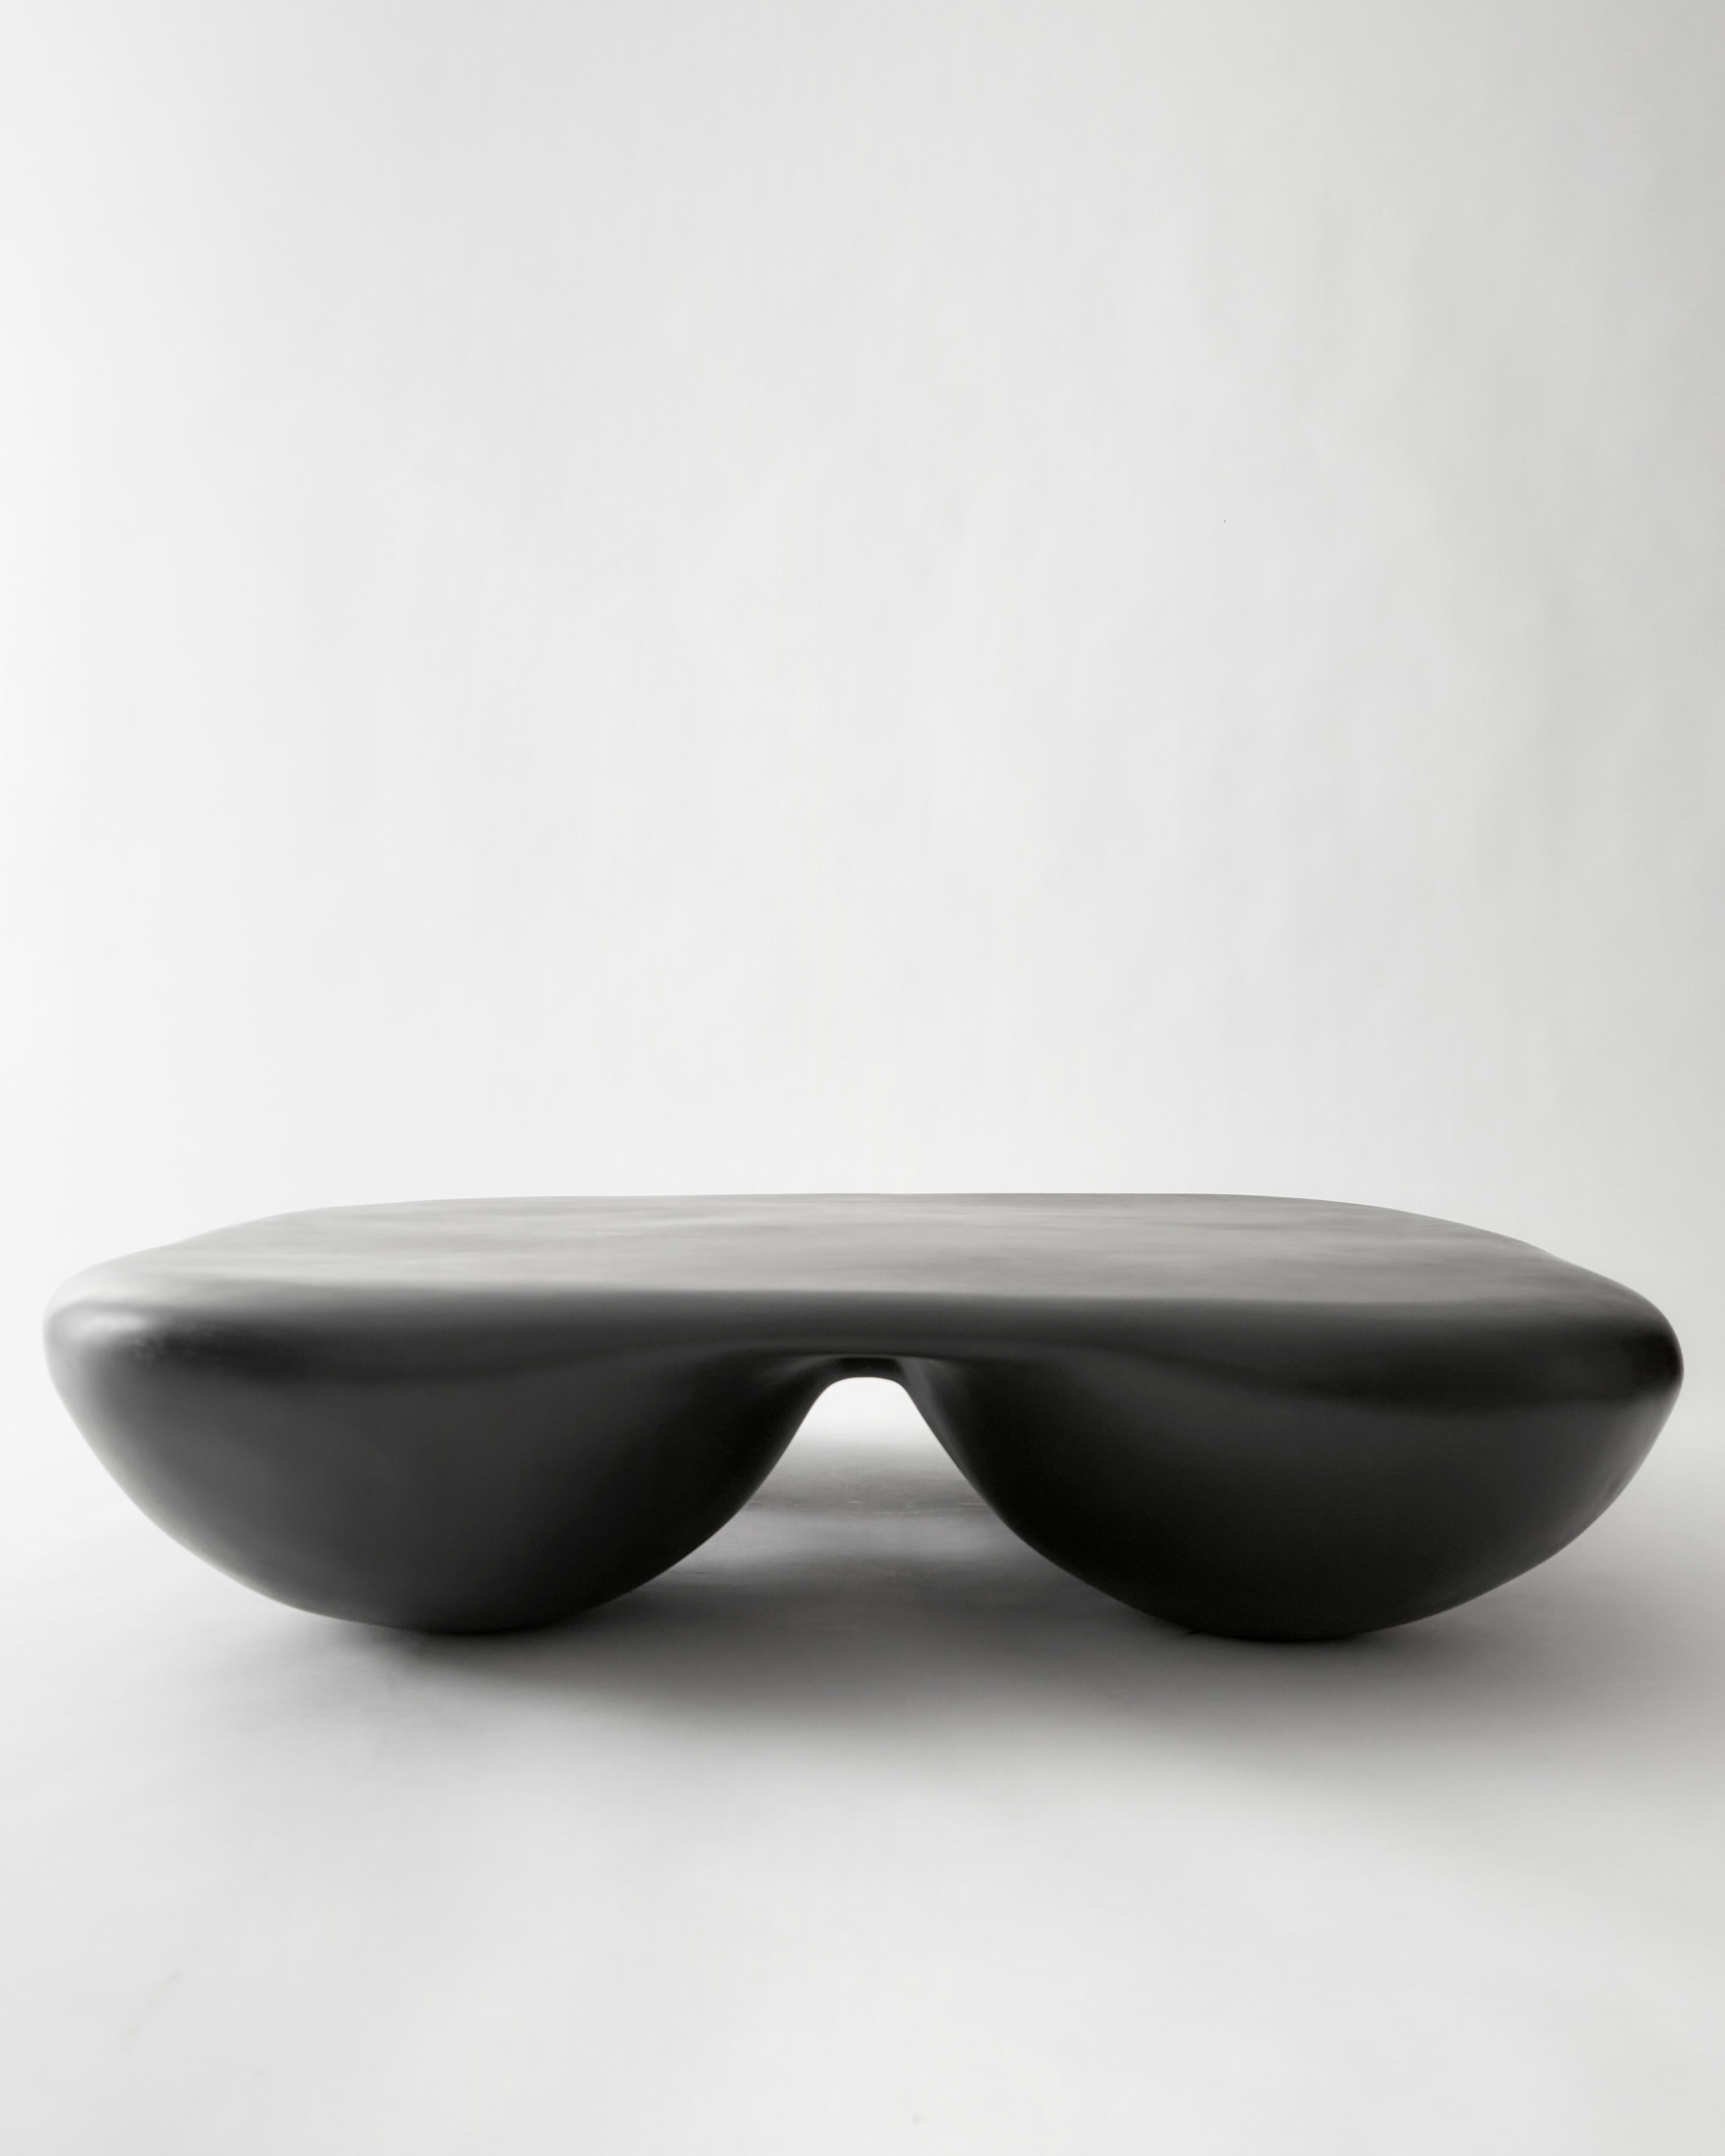 Black Rounded Square Quad Coffee Table in Stone Composite by Mike Ruiz Serra In New Condition For Sale In Brooklyn, NY